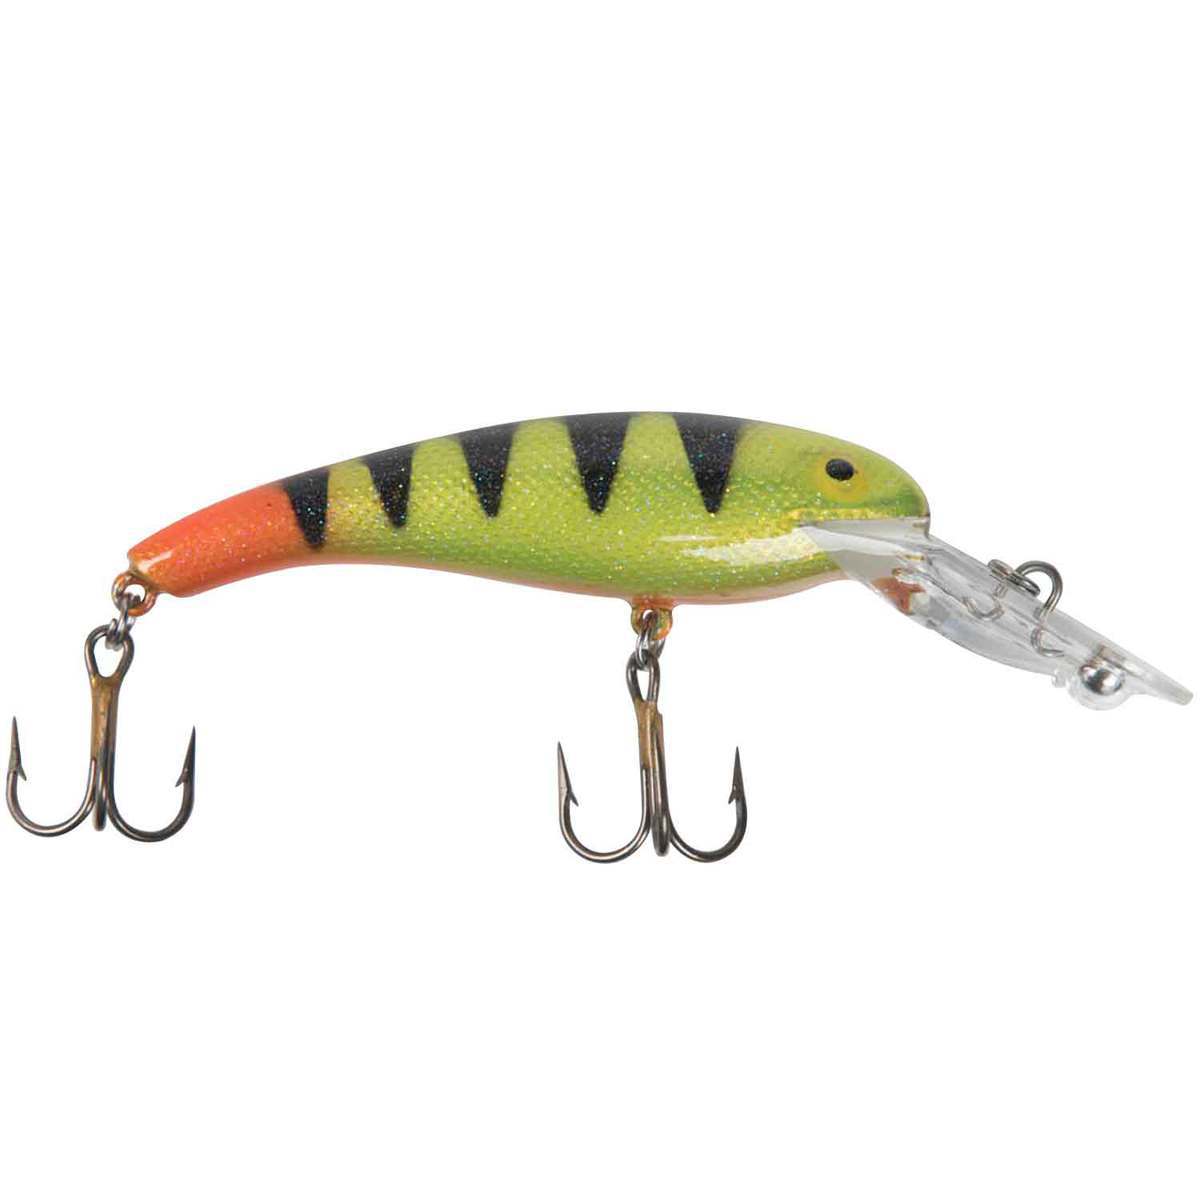 Fingerling Hi-Catch from Canada - Excellent trout trolling lure